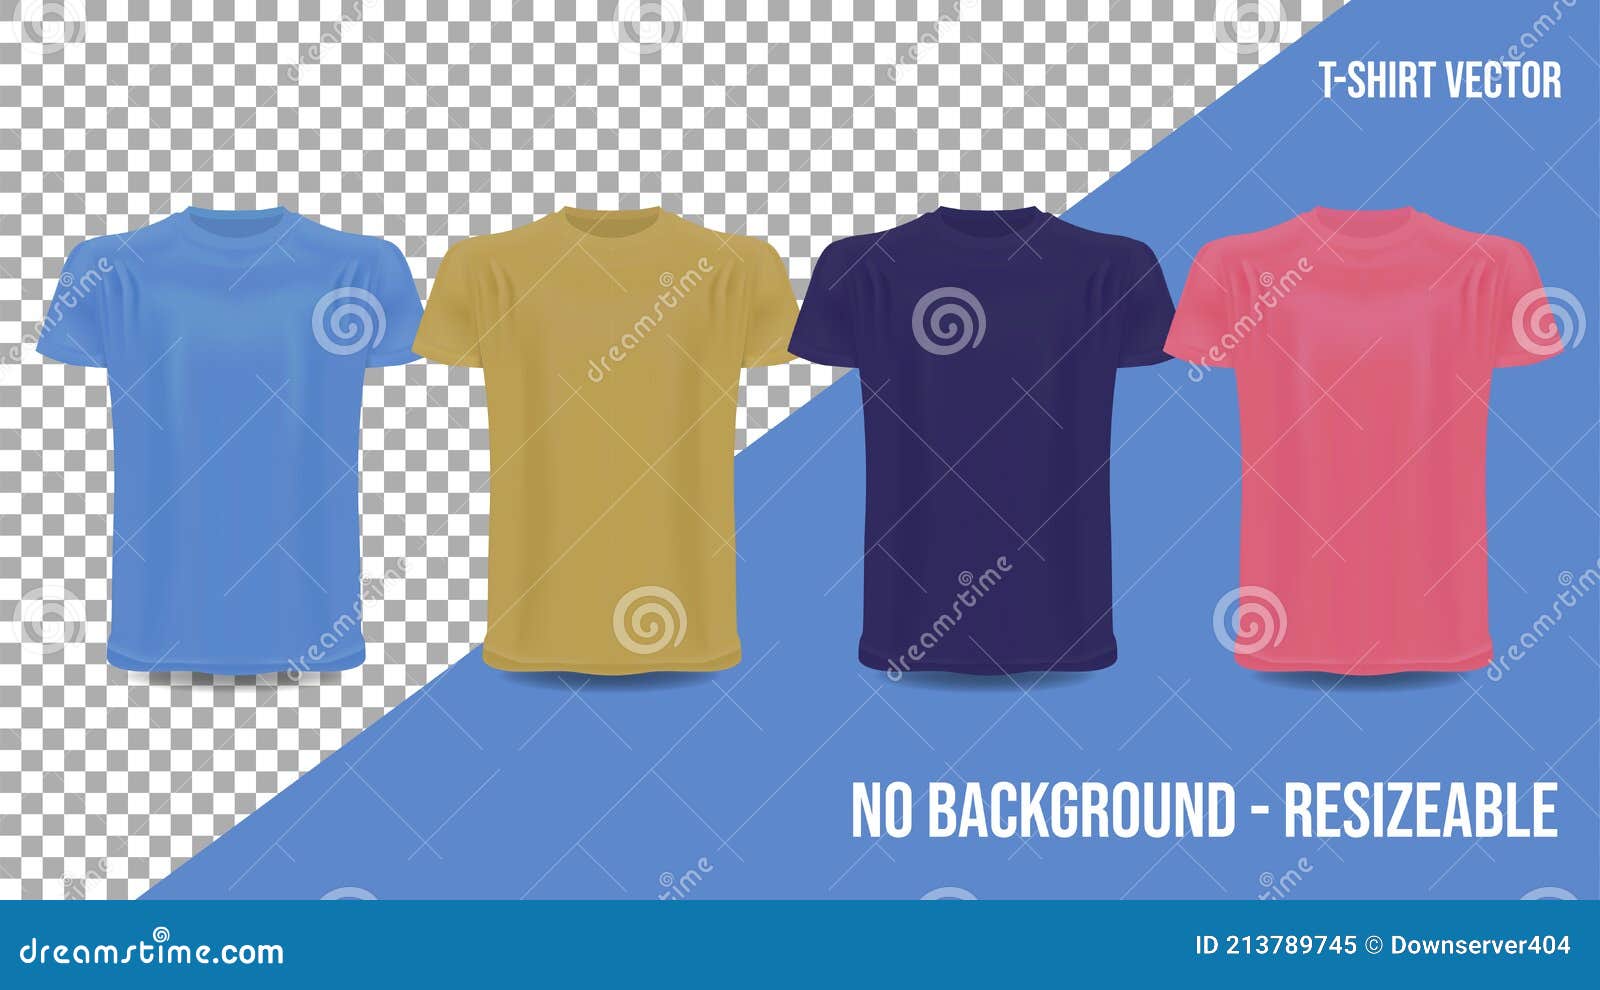 Short Sleeve T Shirt Design Template Without Background Stock Vector Illustration Of Advertising Branding